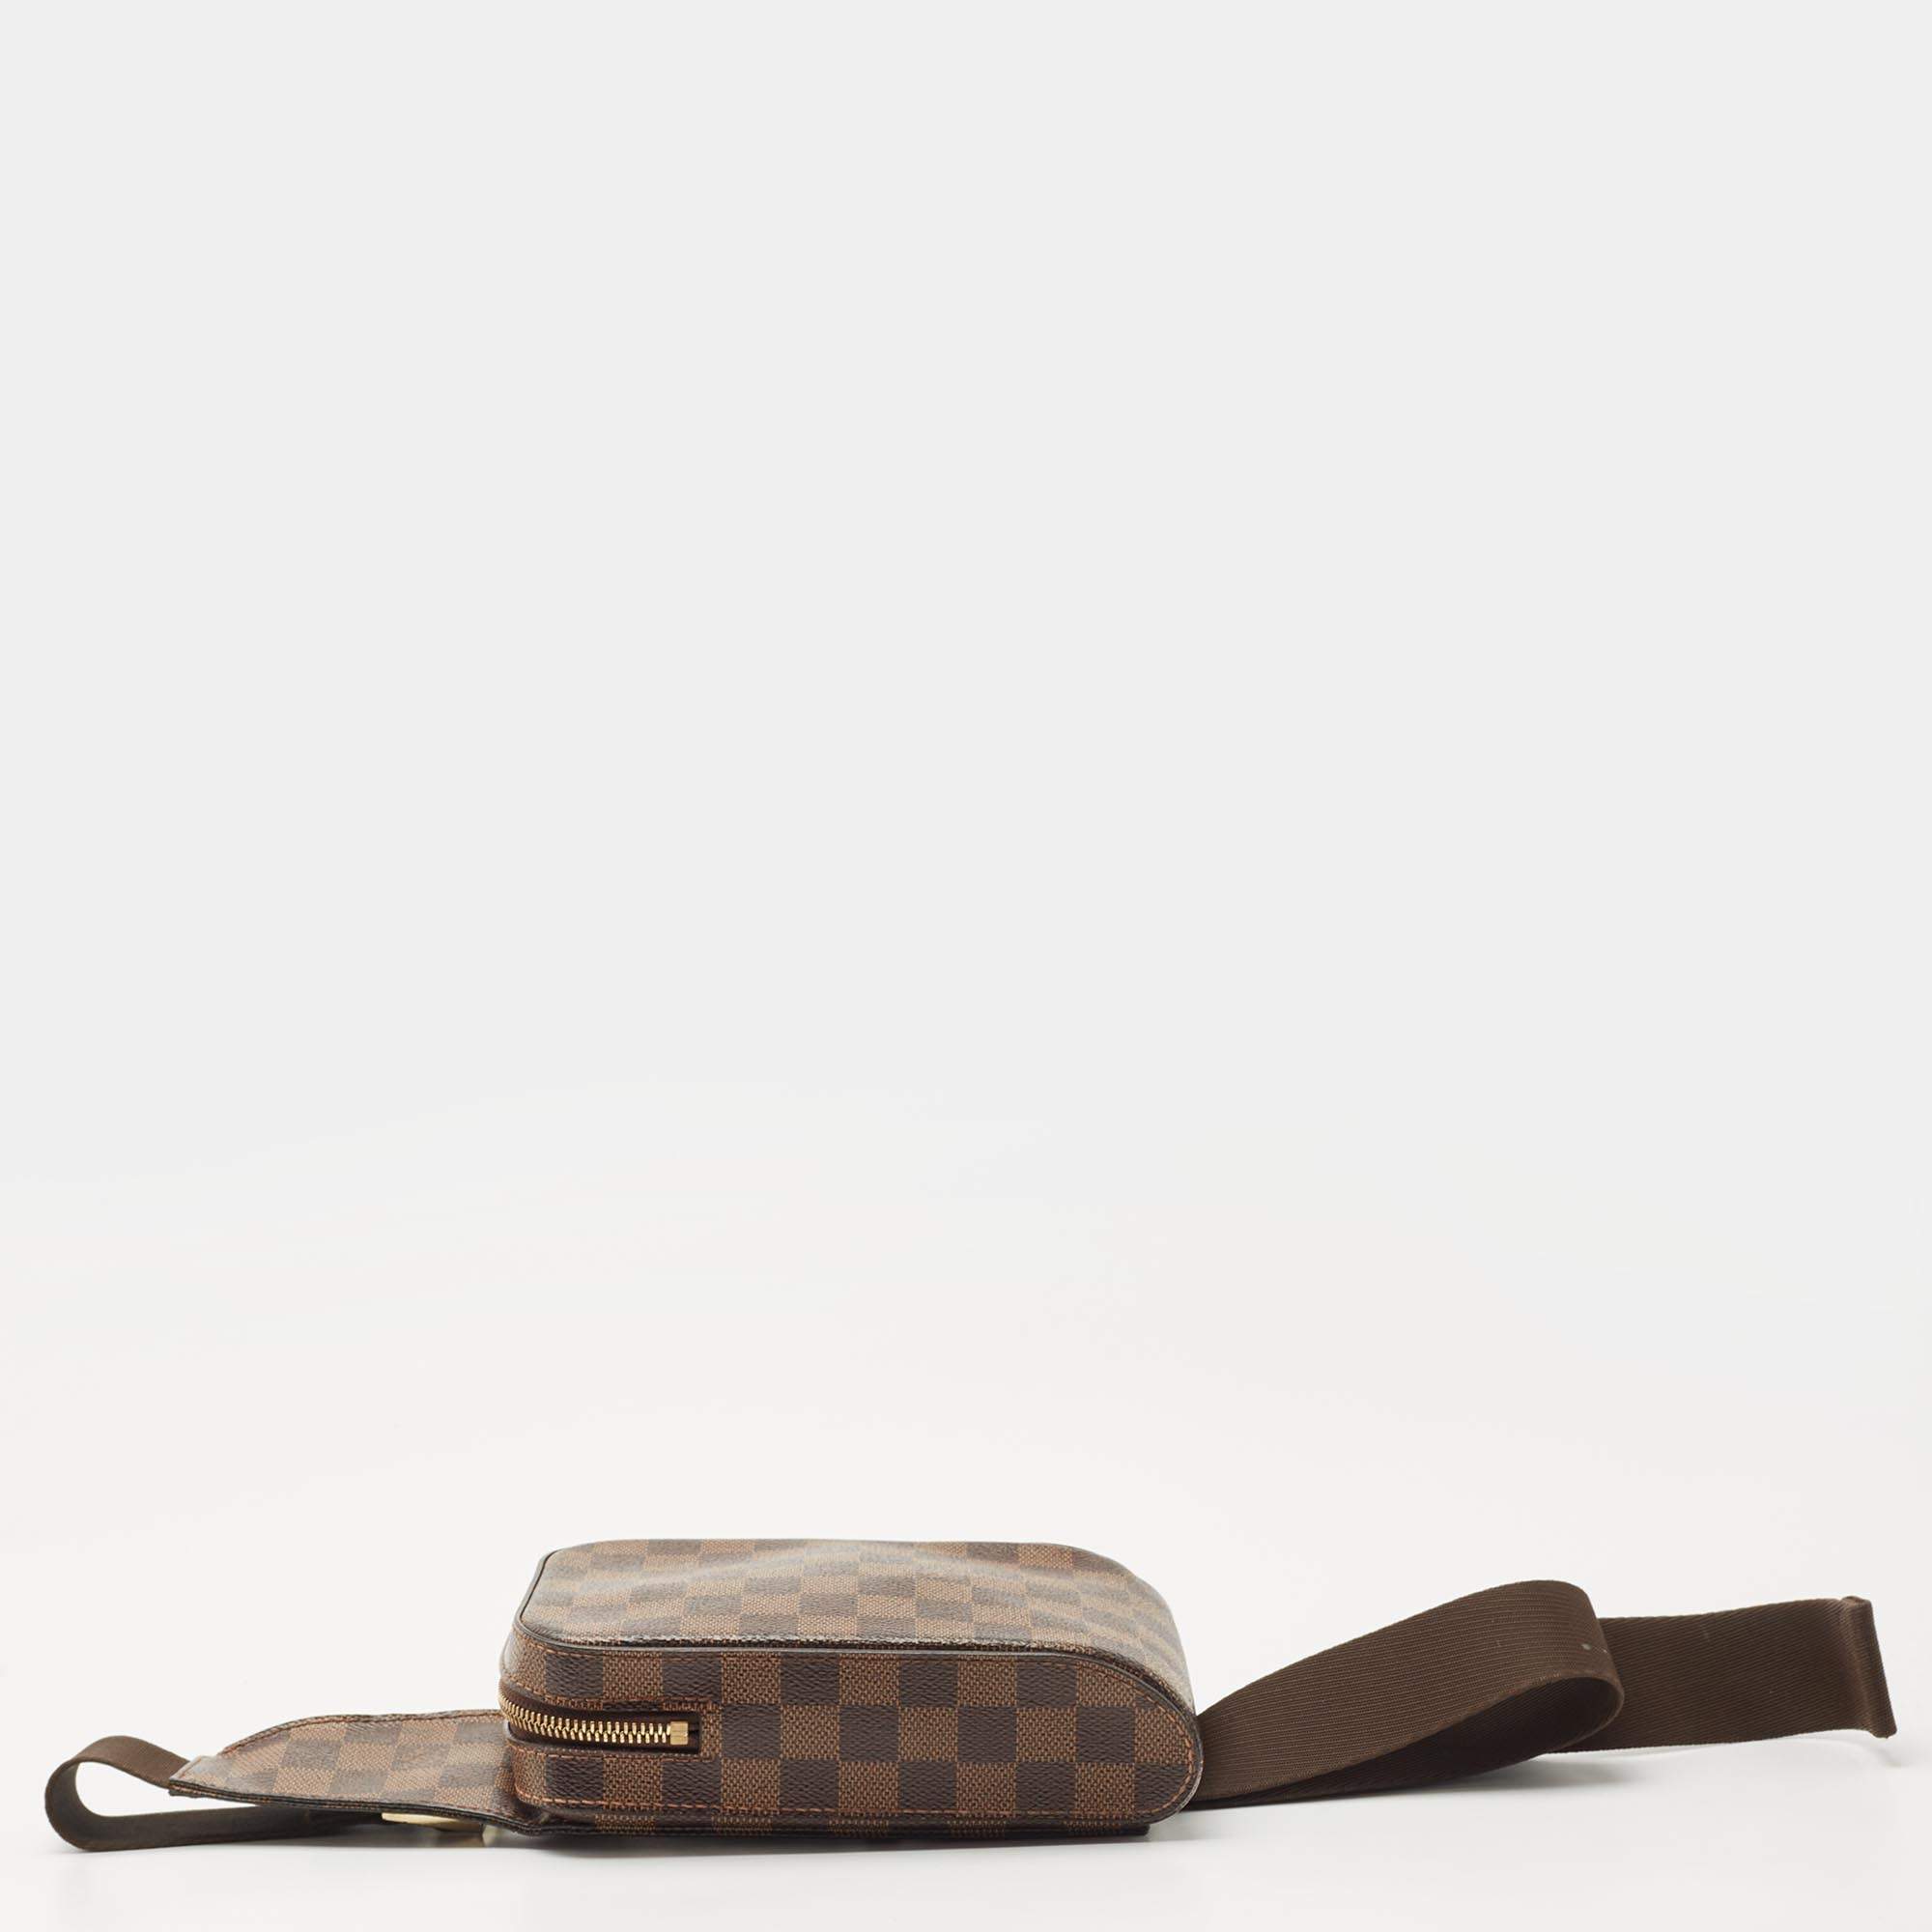 Dauphine belt bag leather mini bag Louis Vuitton Brown in Leather - 20004029